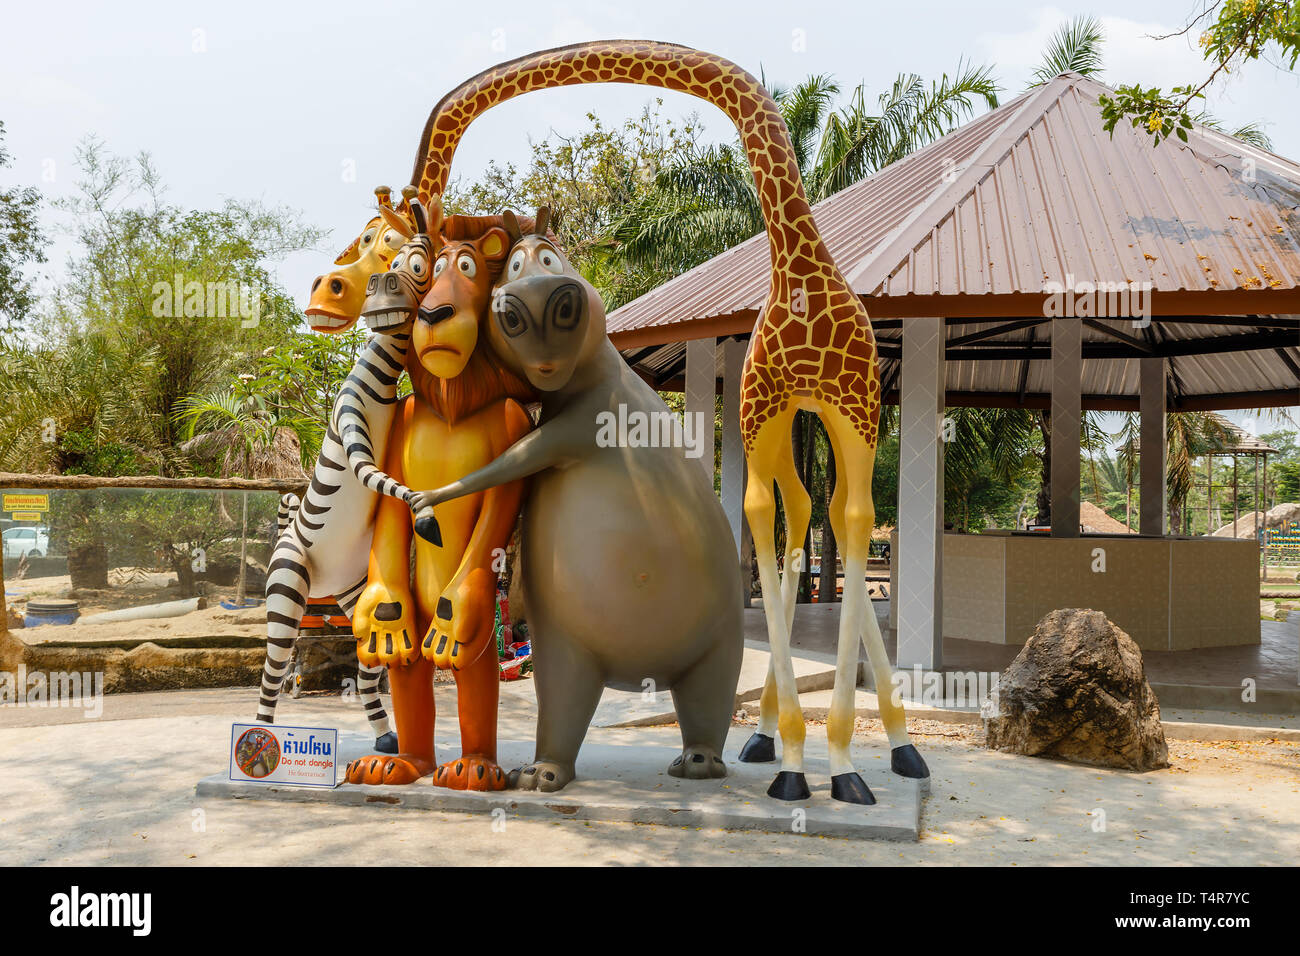 Bang Phra, Si Racha District, Thailand - March 22, 2016: Khao Kheow open zoo. The figures of animals from the cartoon Madagascar . Stock Photo